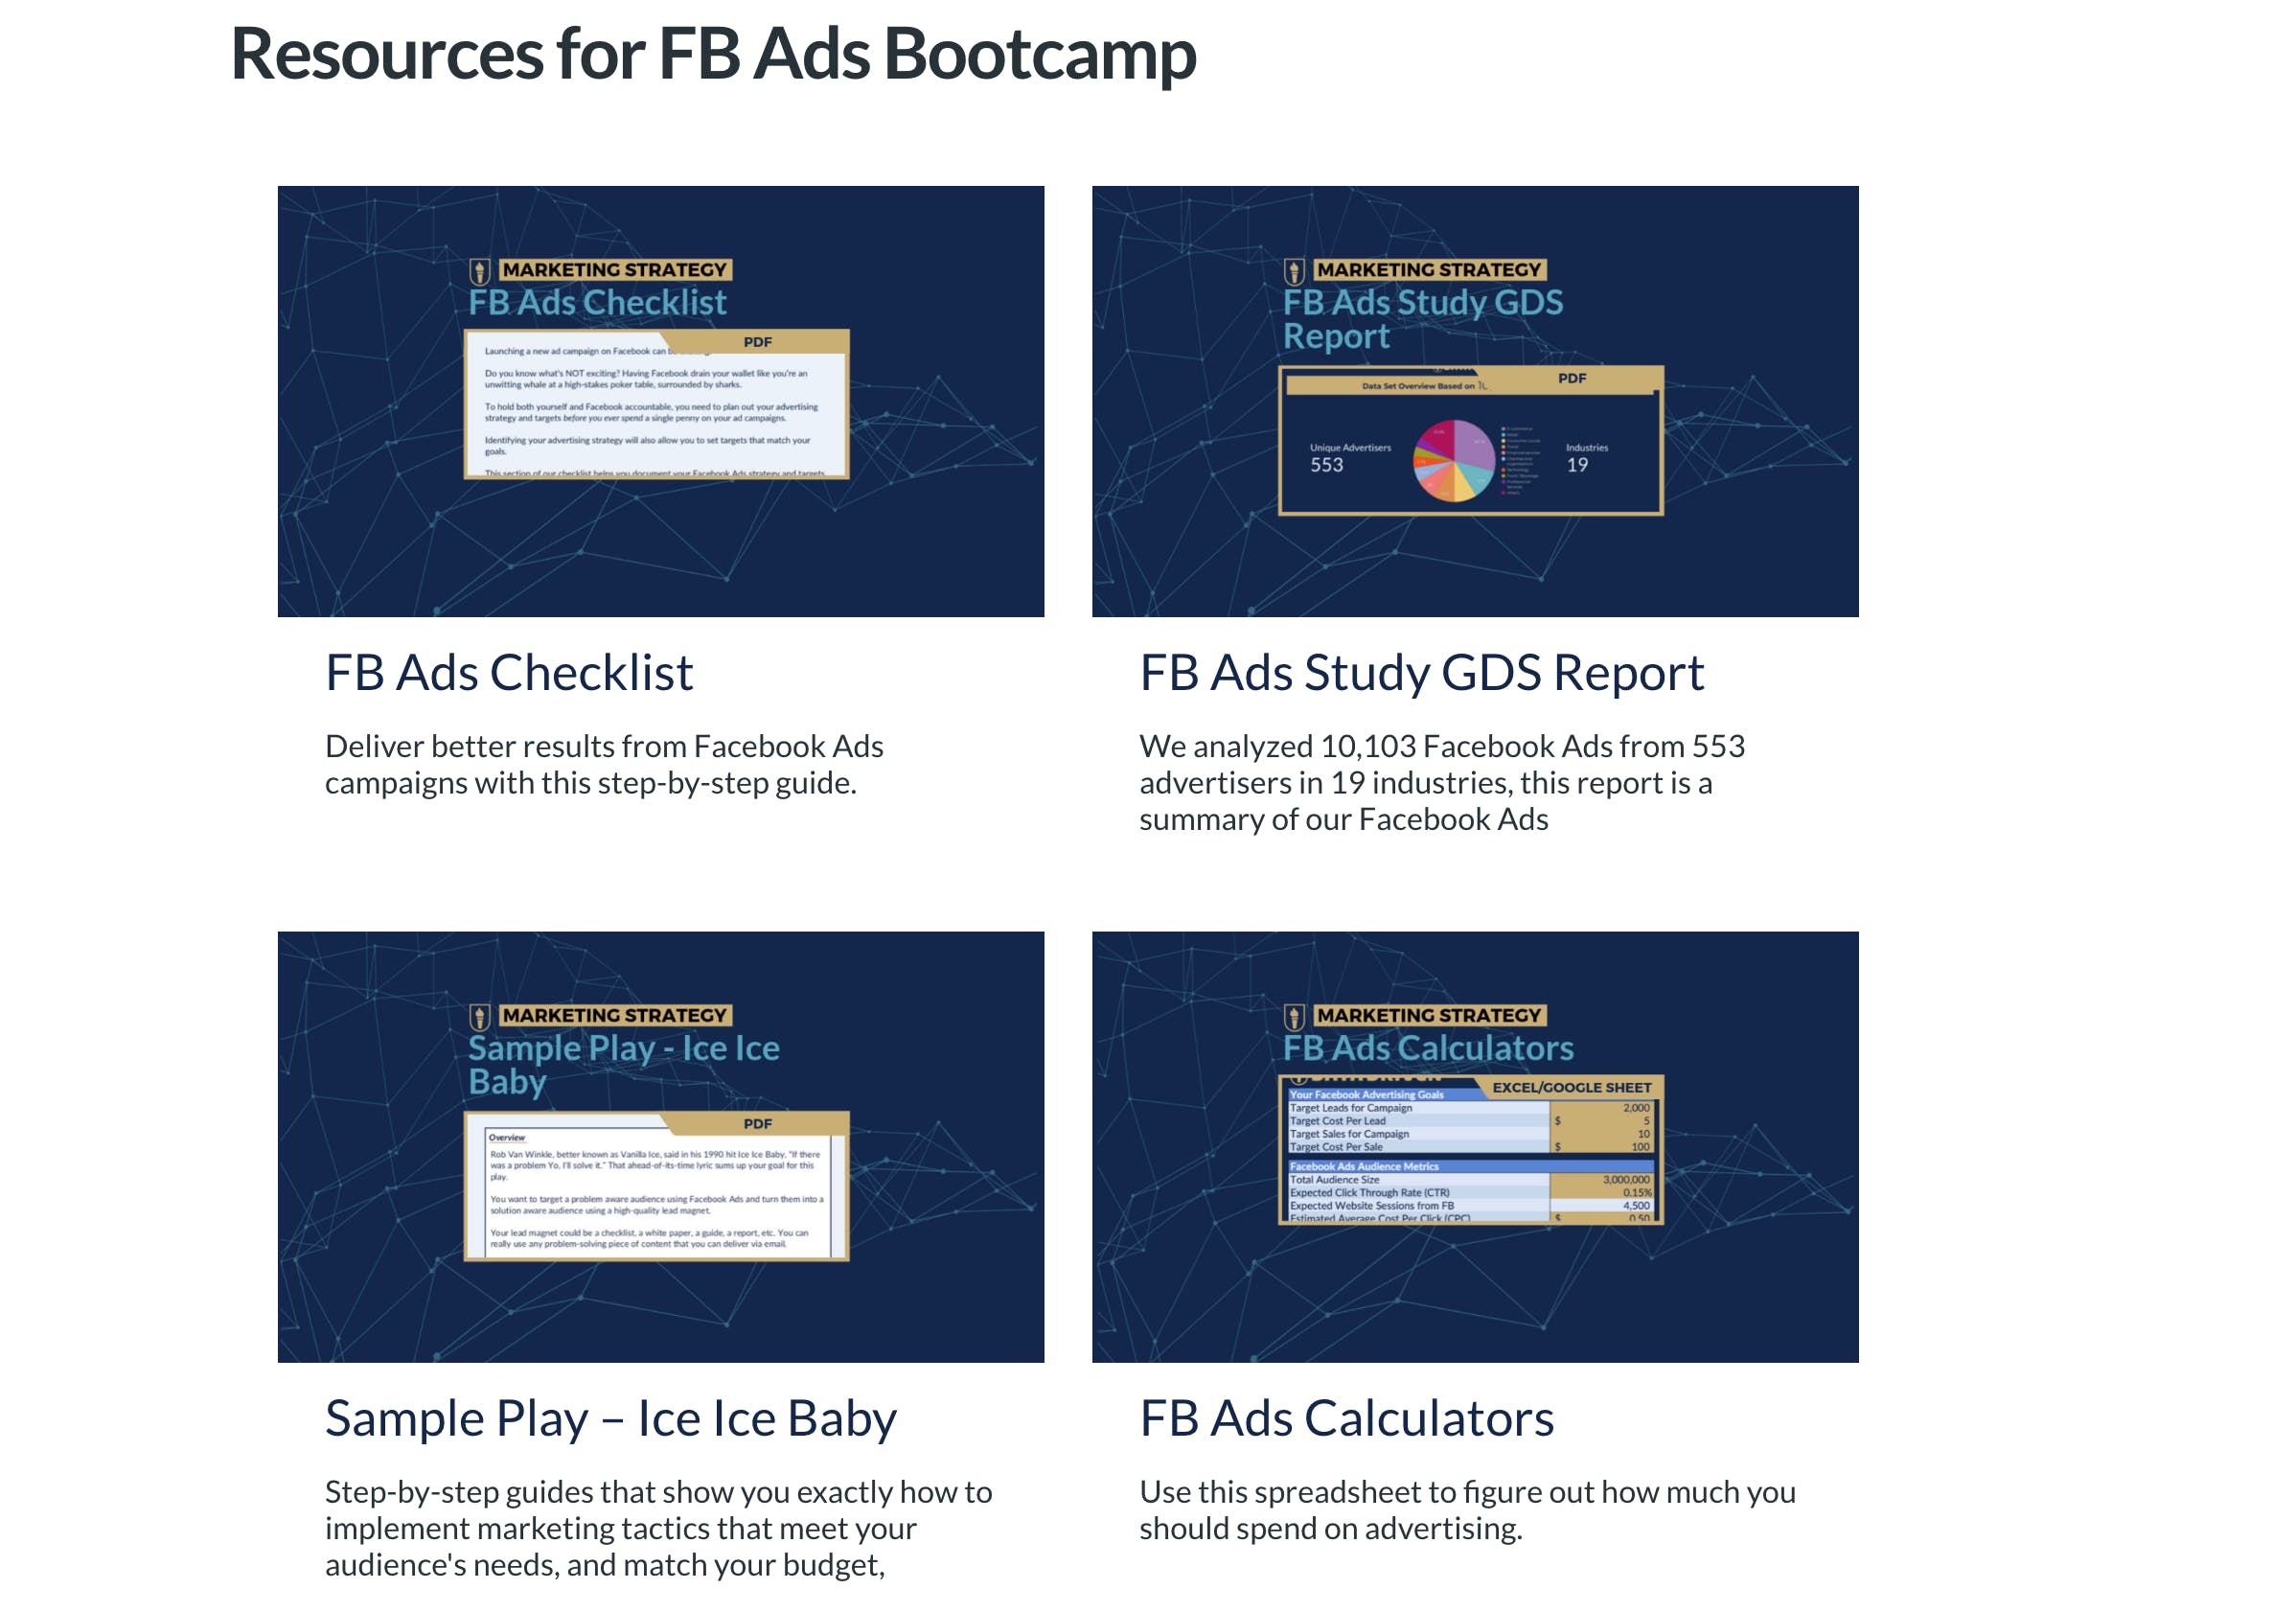 Facebook Ads Bootcamp by Data Driven media 3